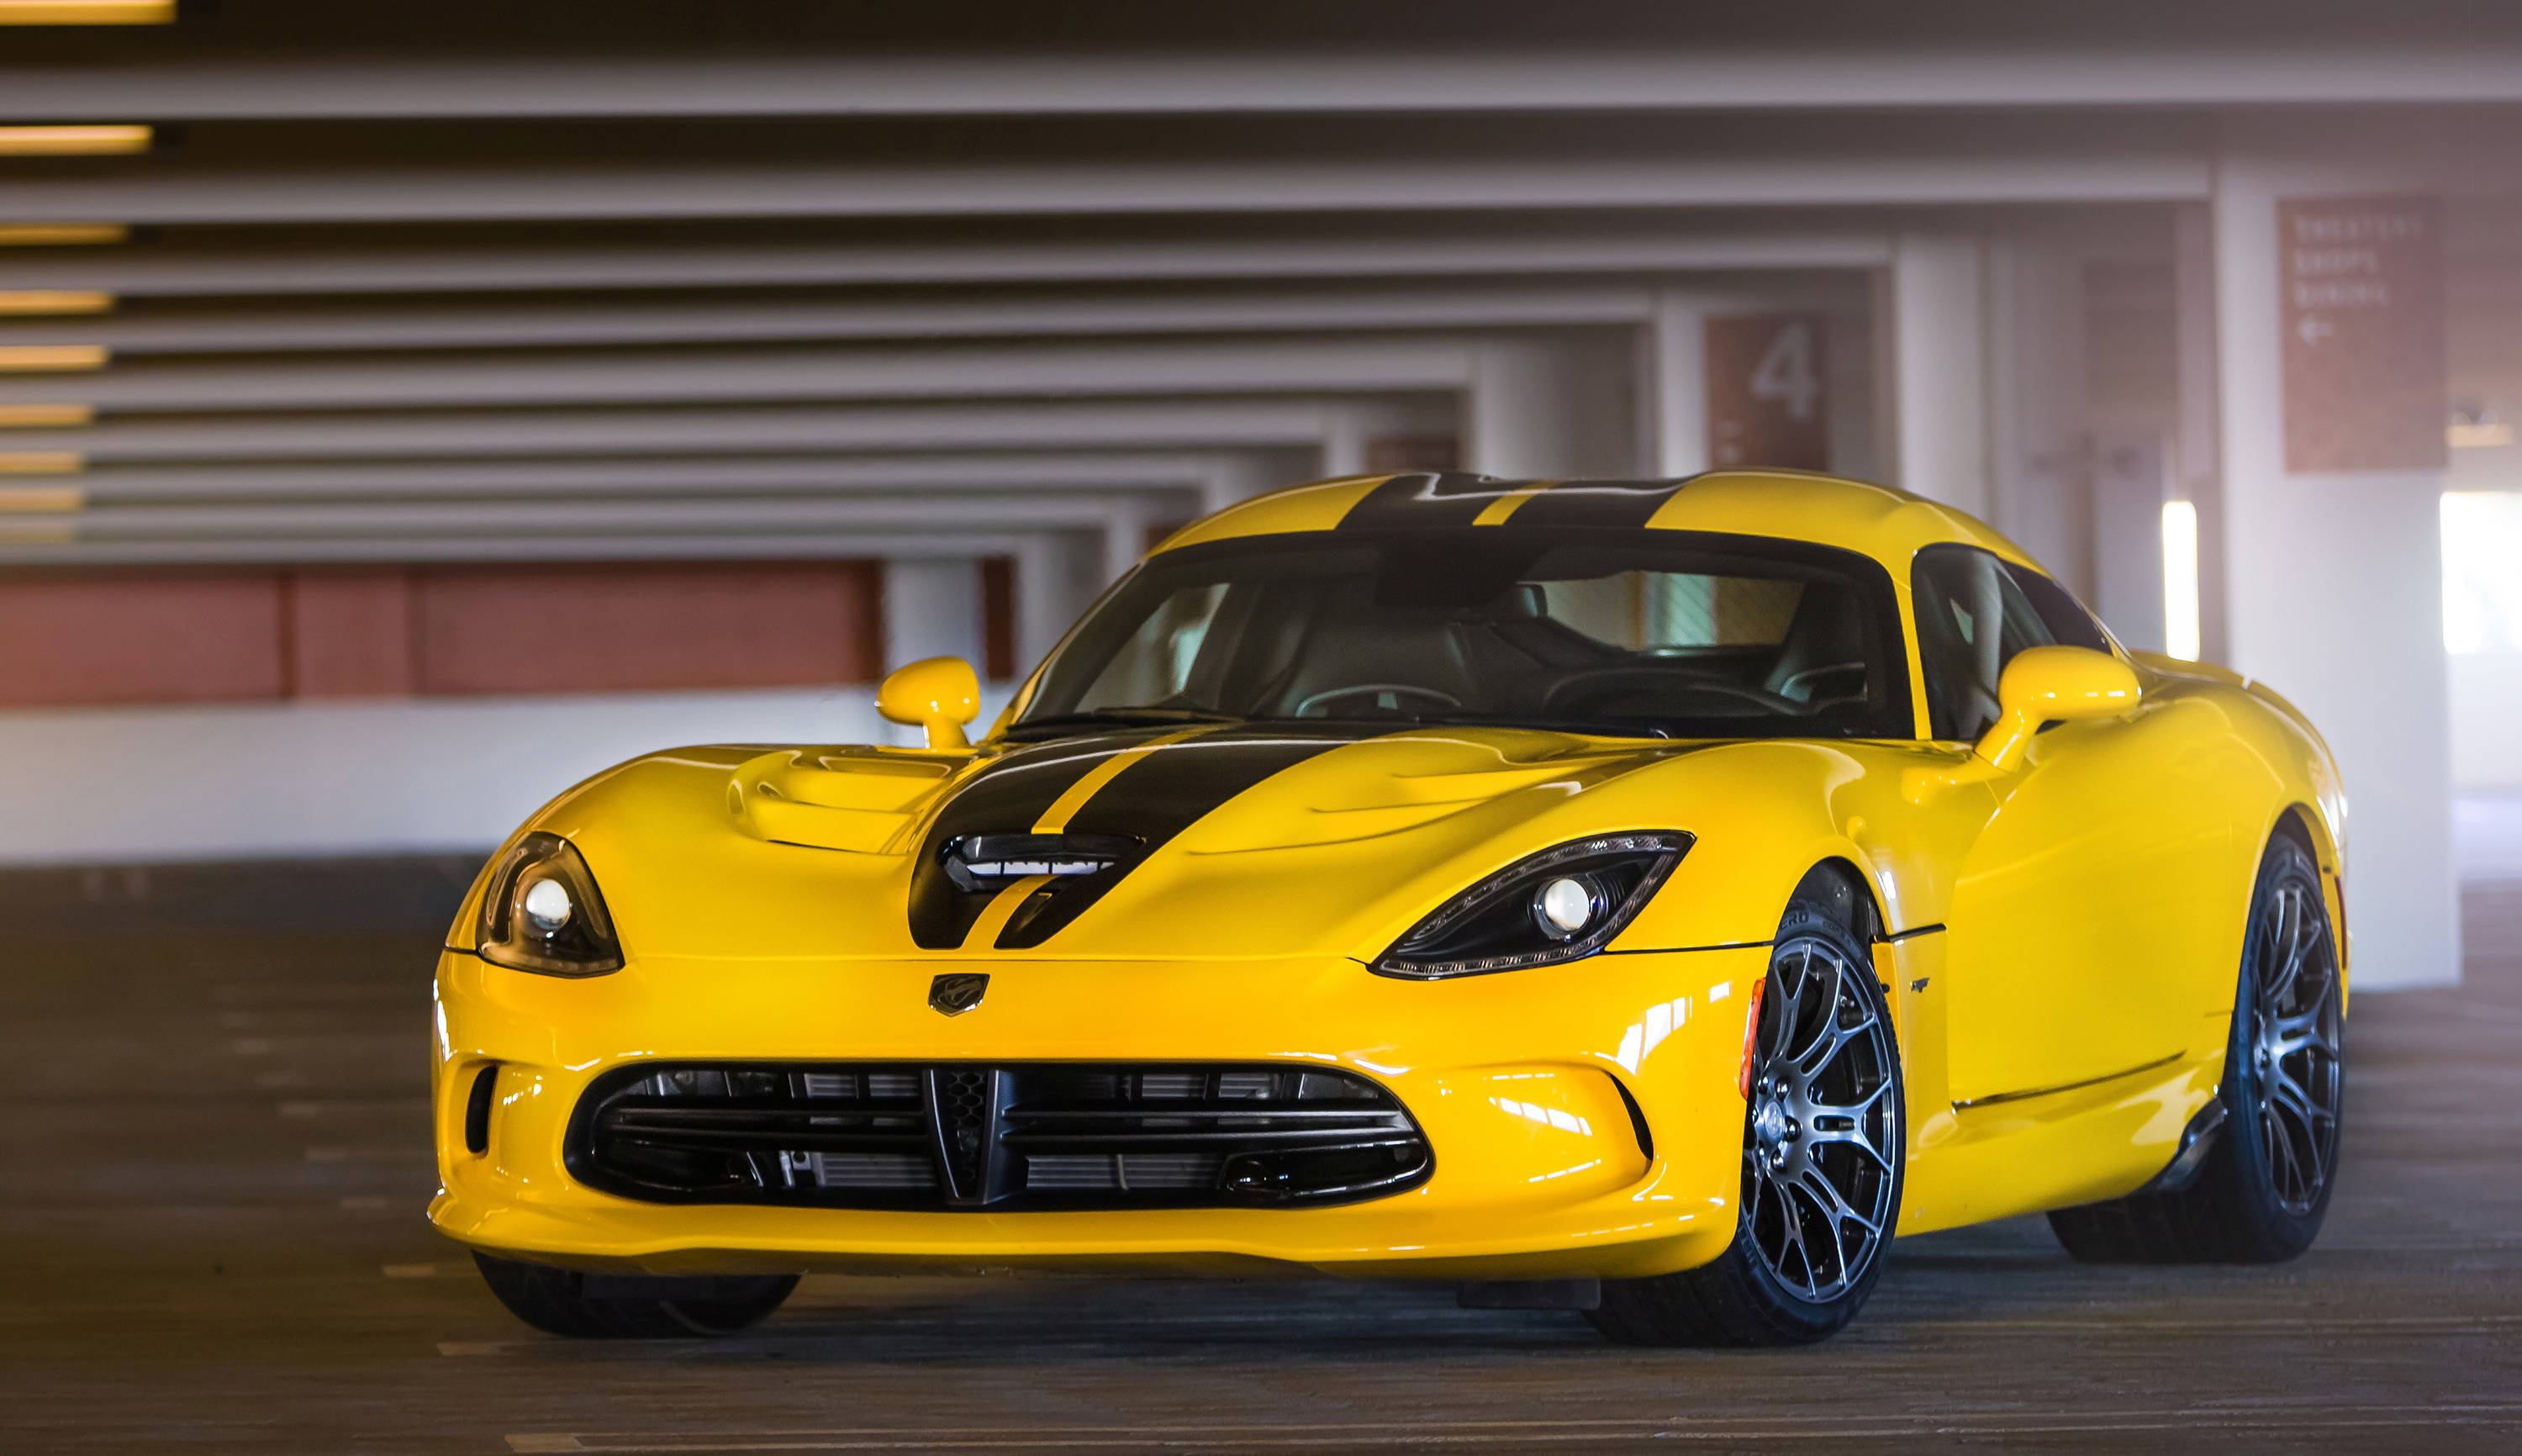 gts, cars, front view, viper HD Wallpaper for Phone